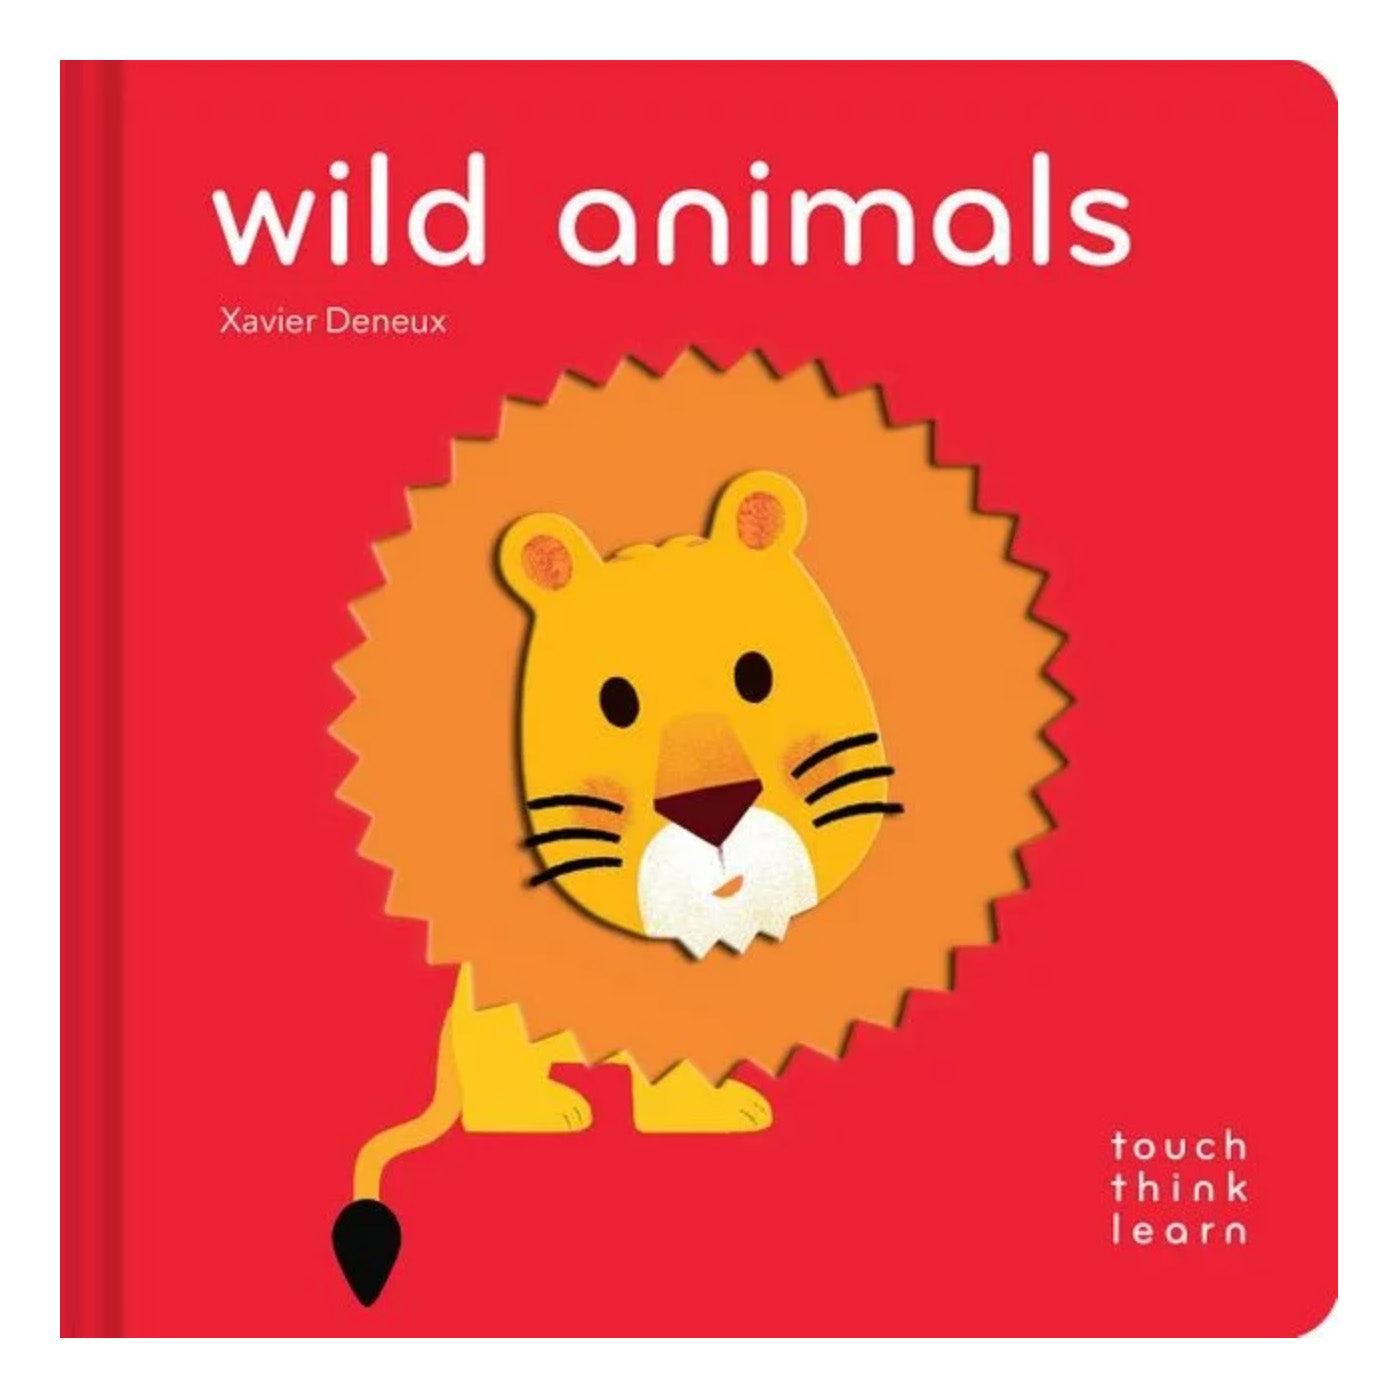 touch think learn: wild animals